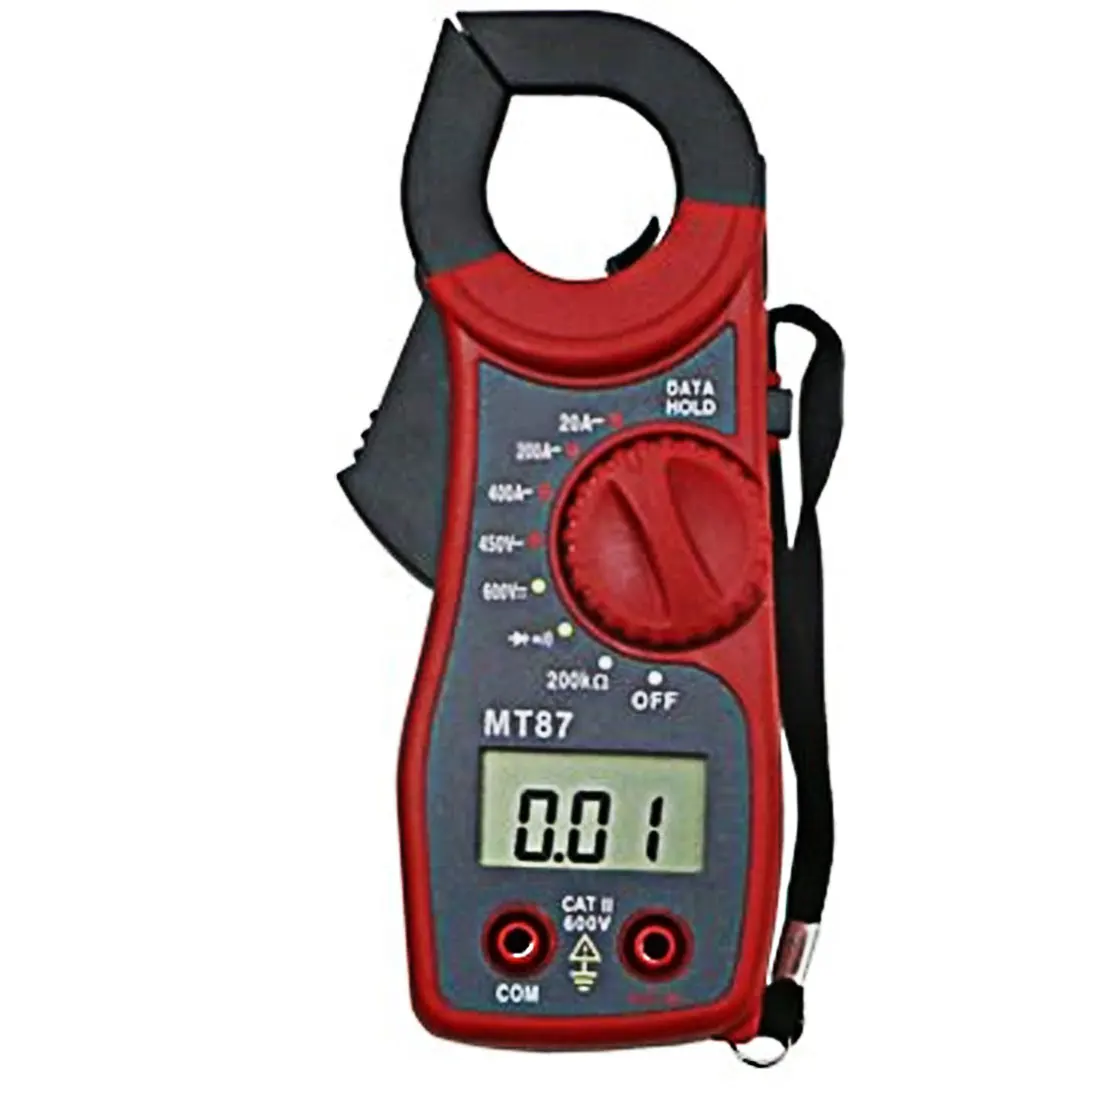 

Digital Clamp Meter Current Clamp AC DC Ammeter Multimeter Voltmeter Multi-function Diode Fire Wire Tester MT-87